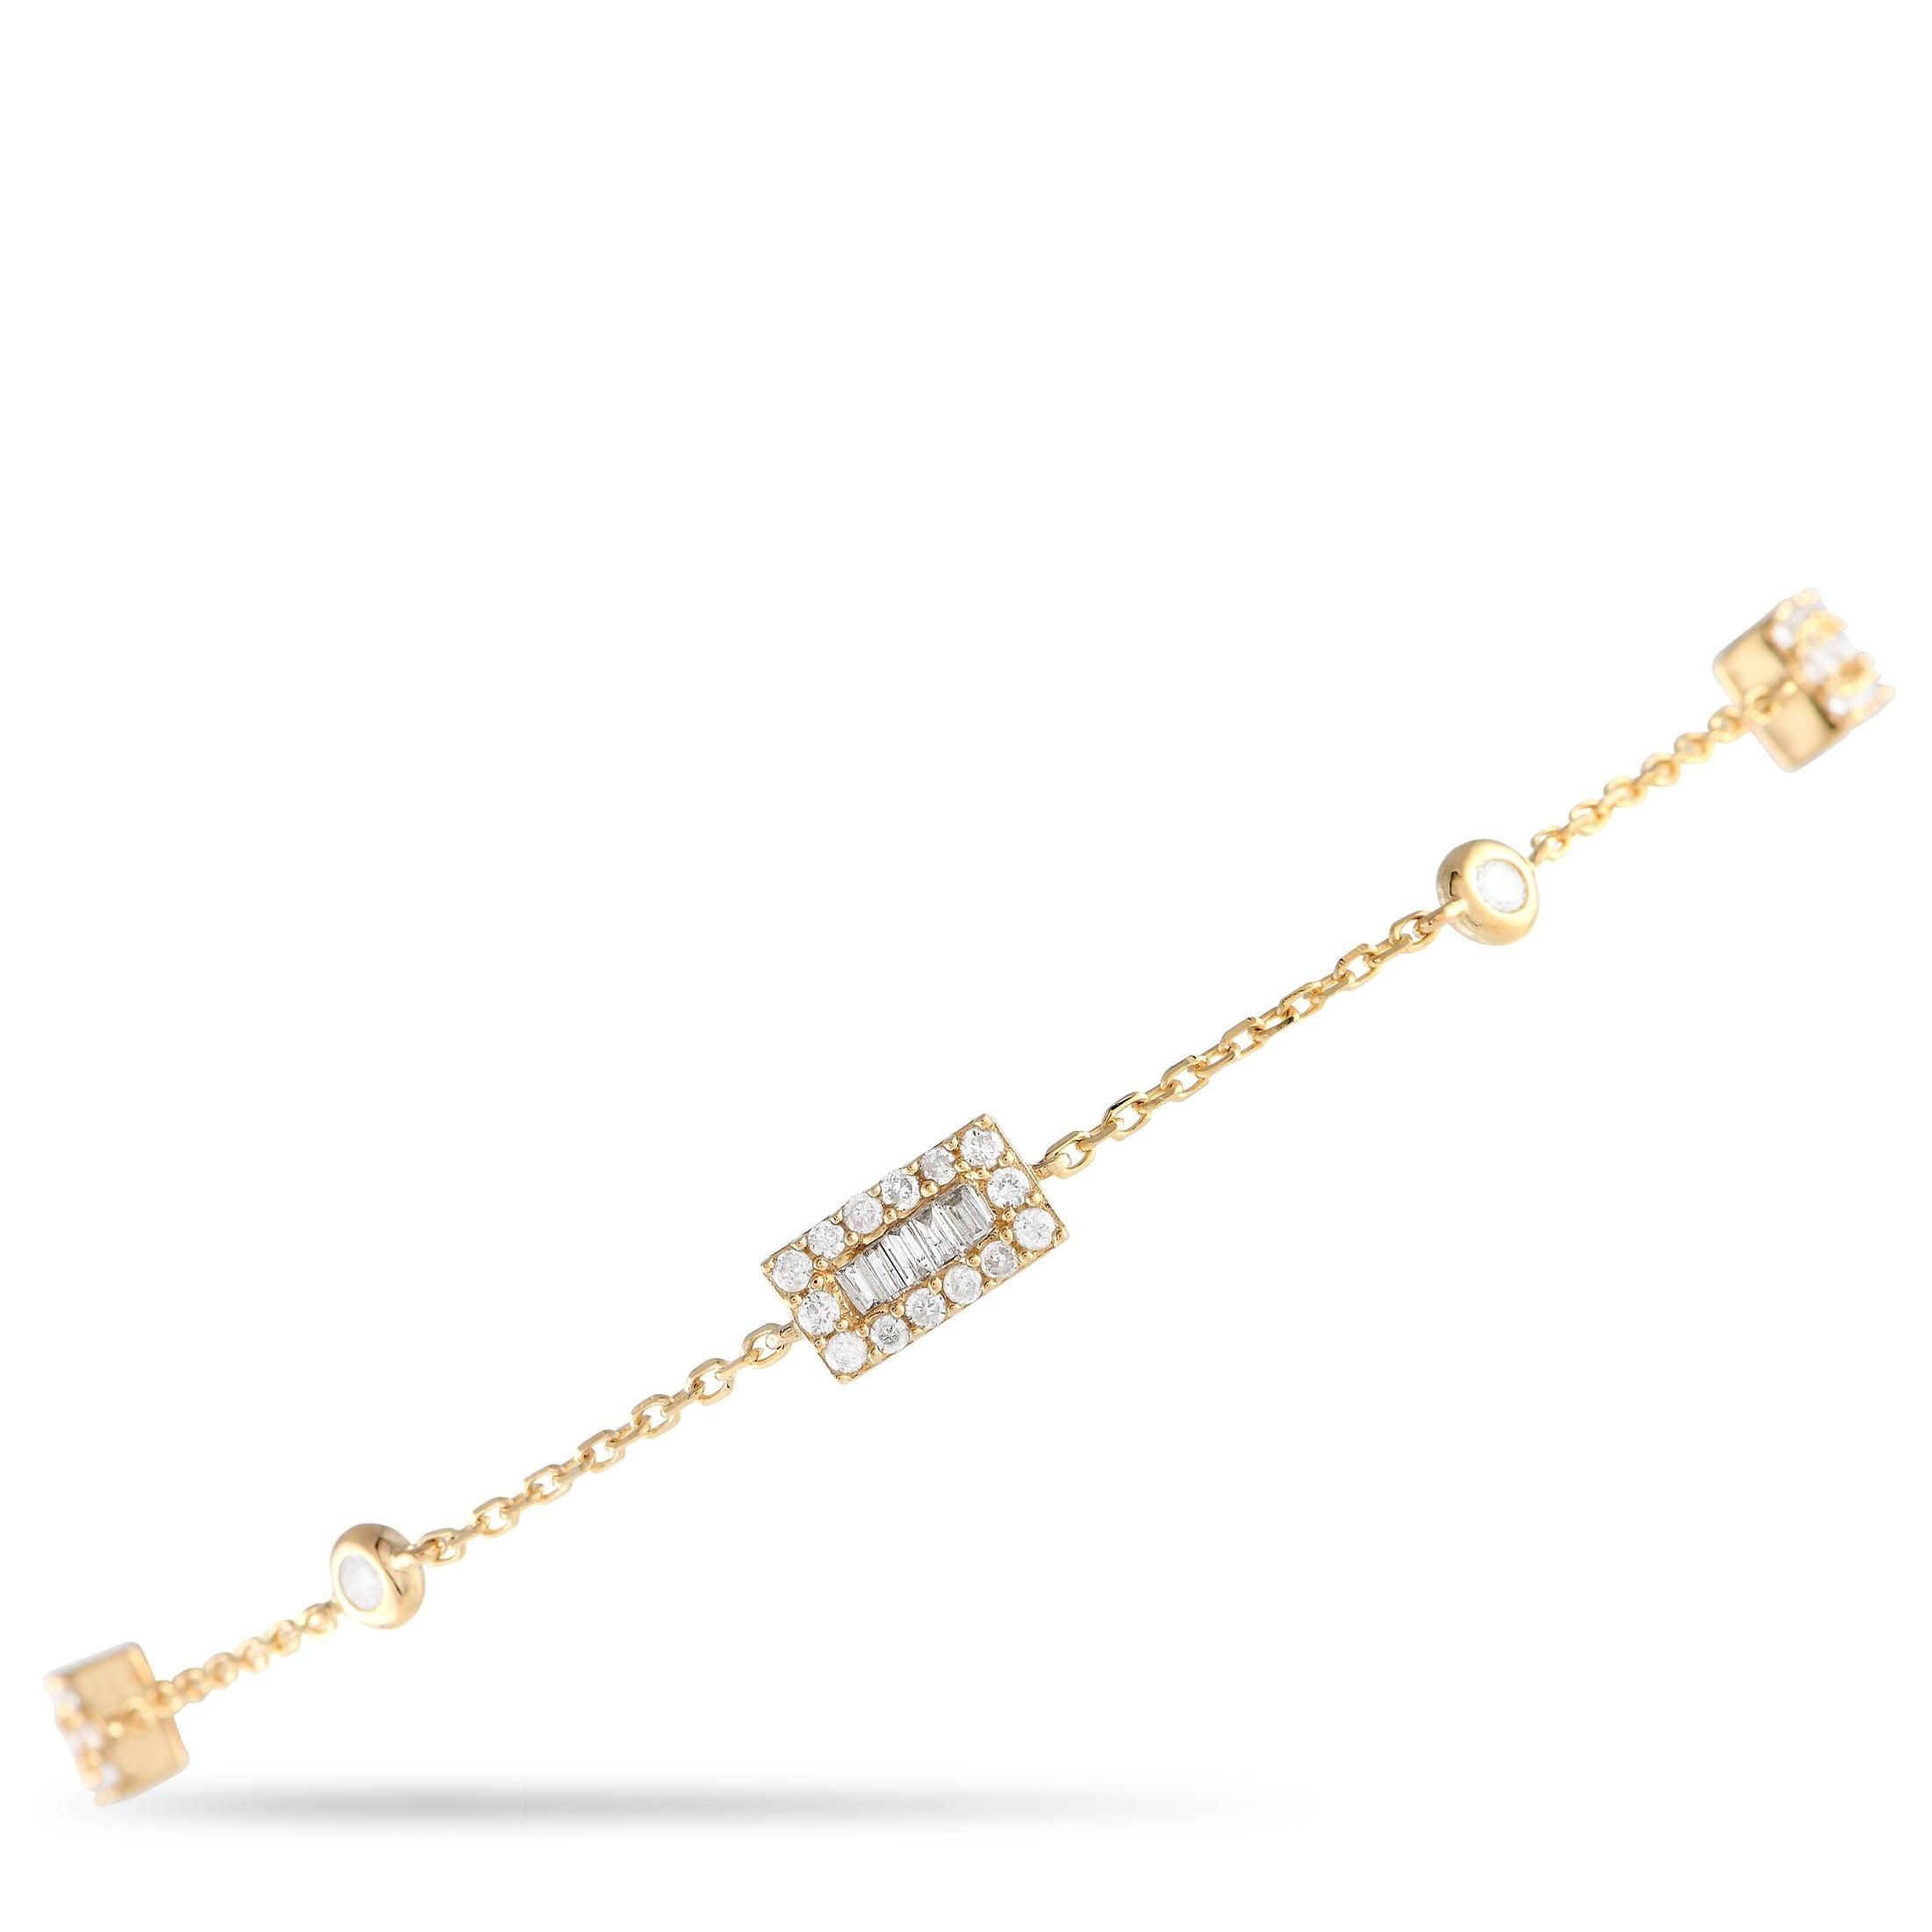 LB Exclusive 14K Yellow Gold 0.45ct Diamon Bracelet BR09827-Y by NON BRANDED